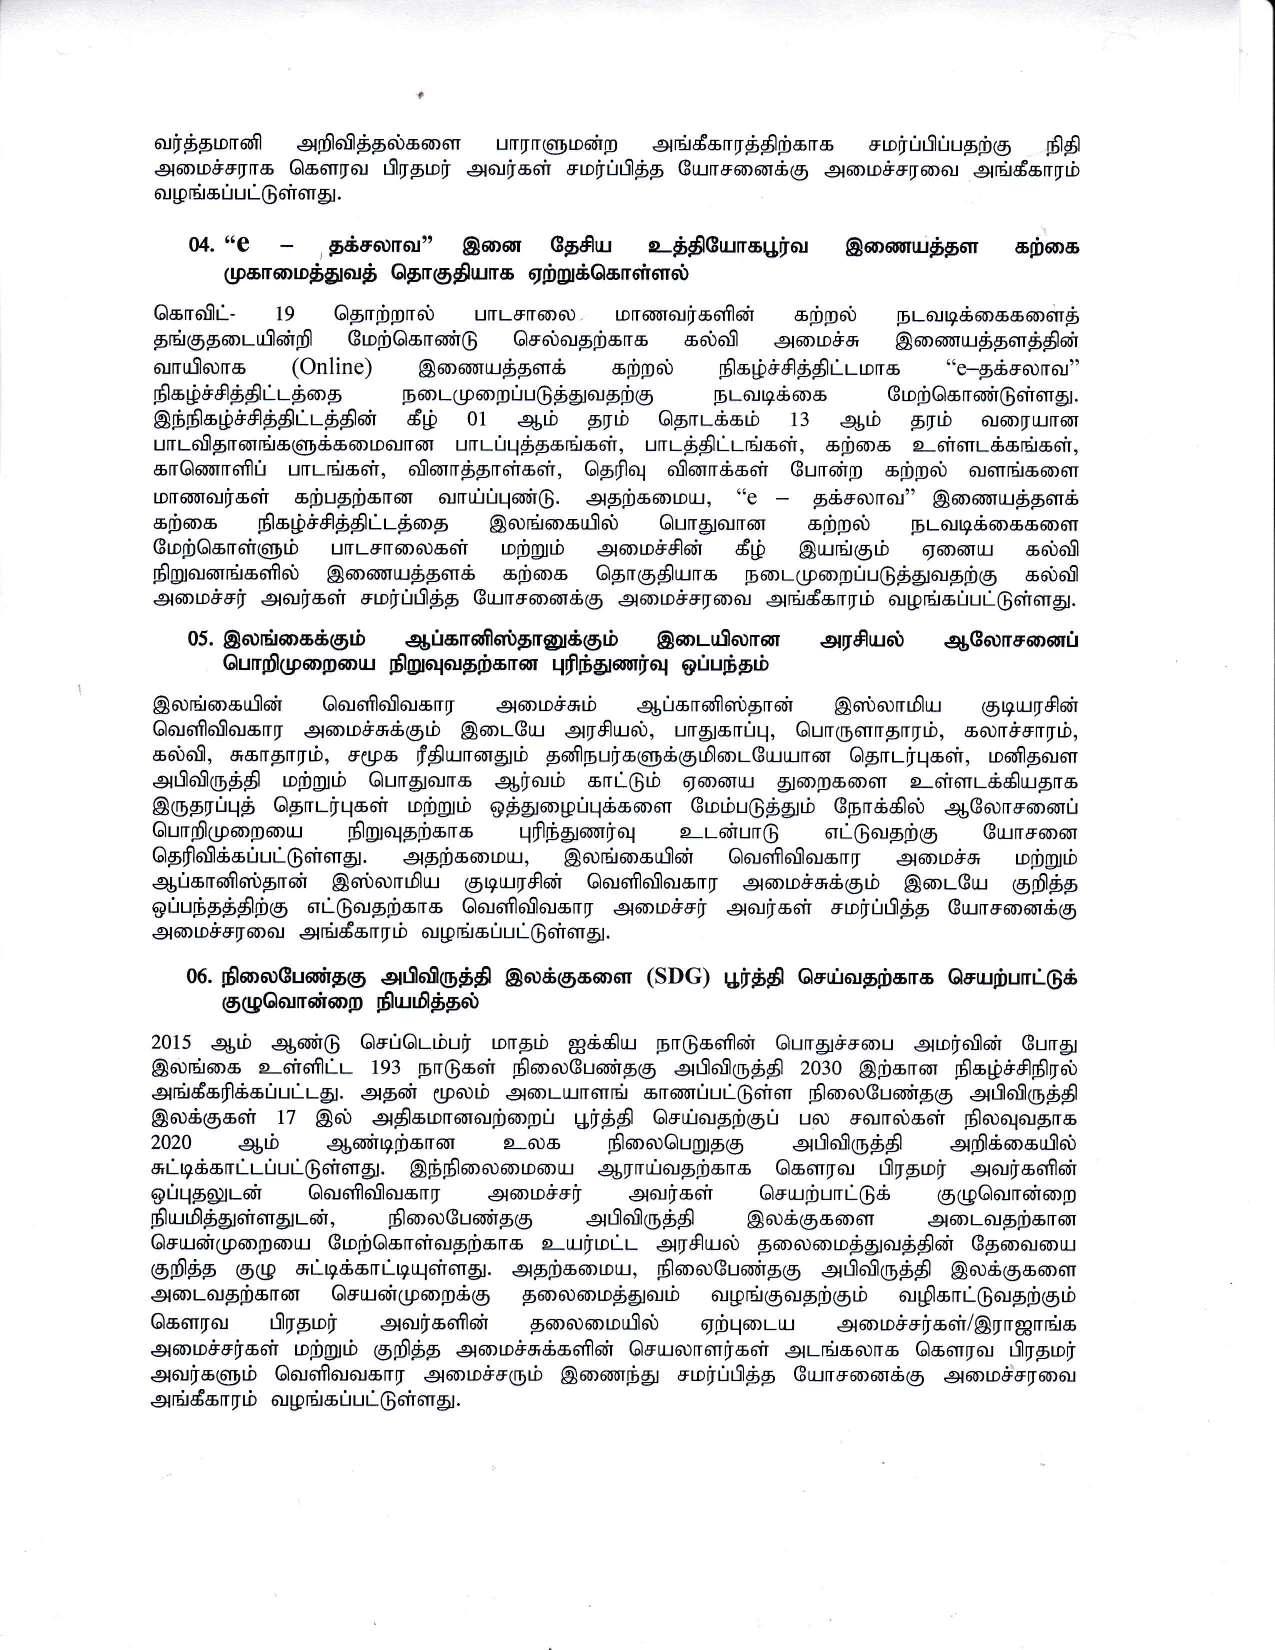 Cabinet Decision on 04.01.2021 Tamil page 002